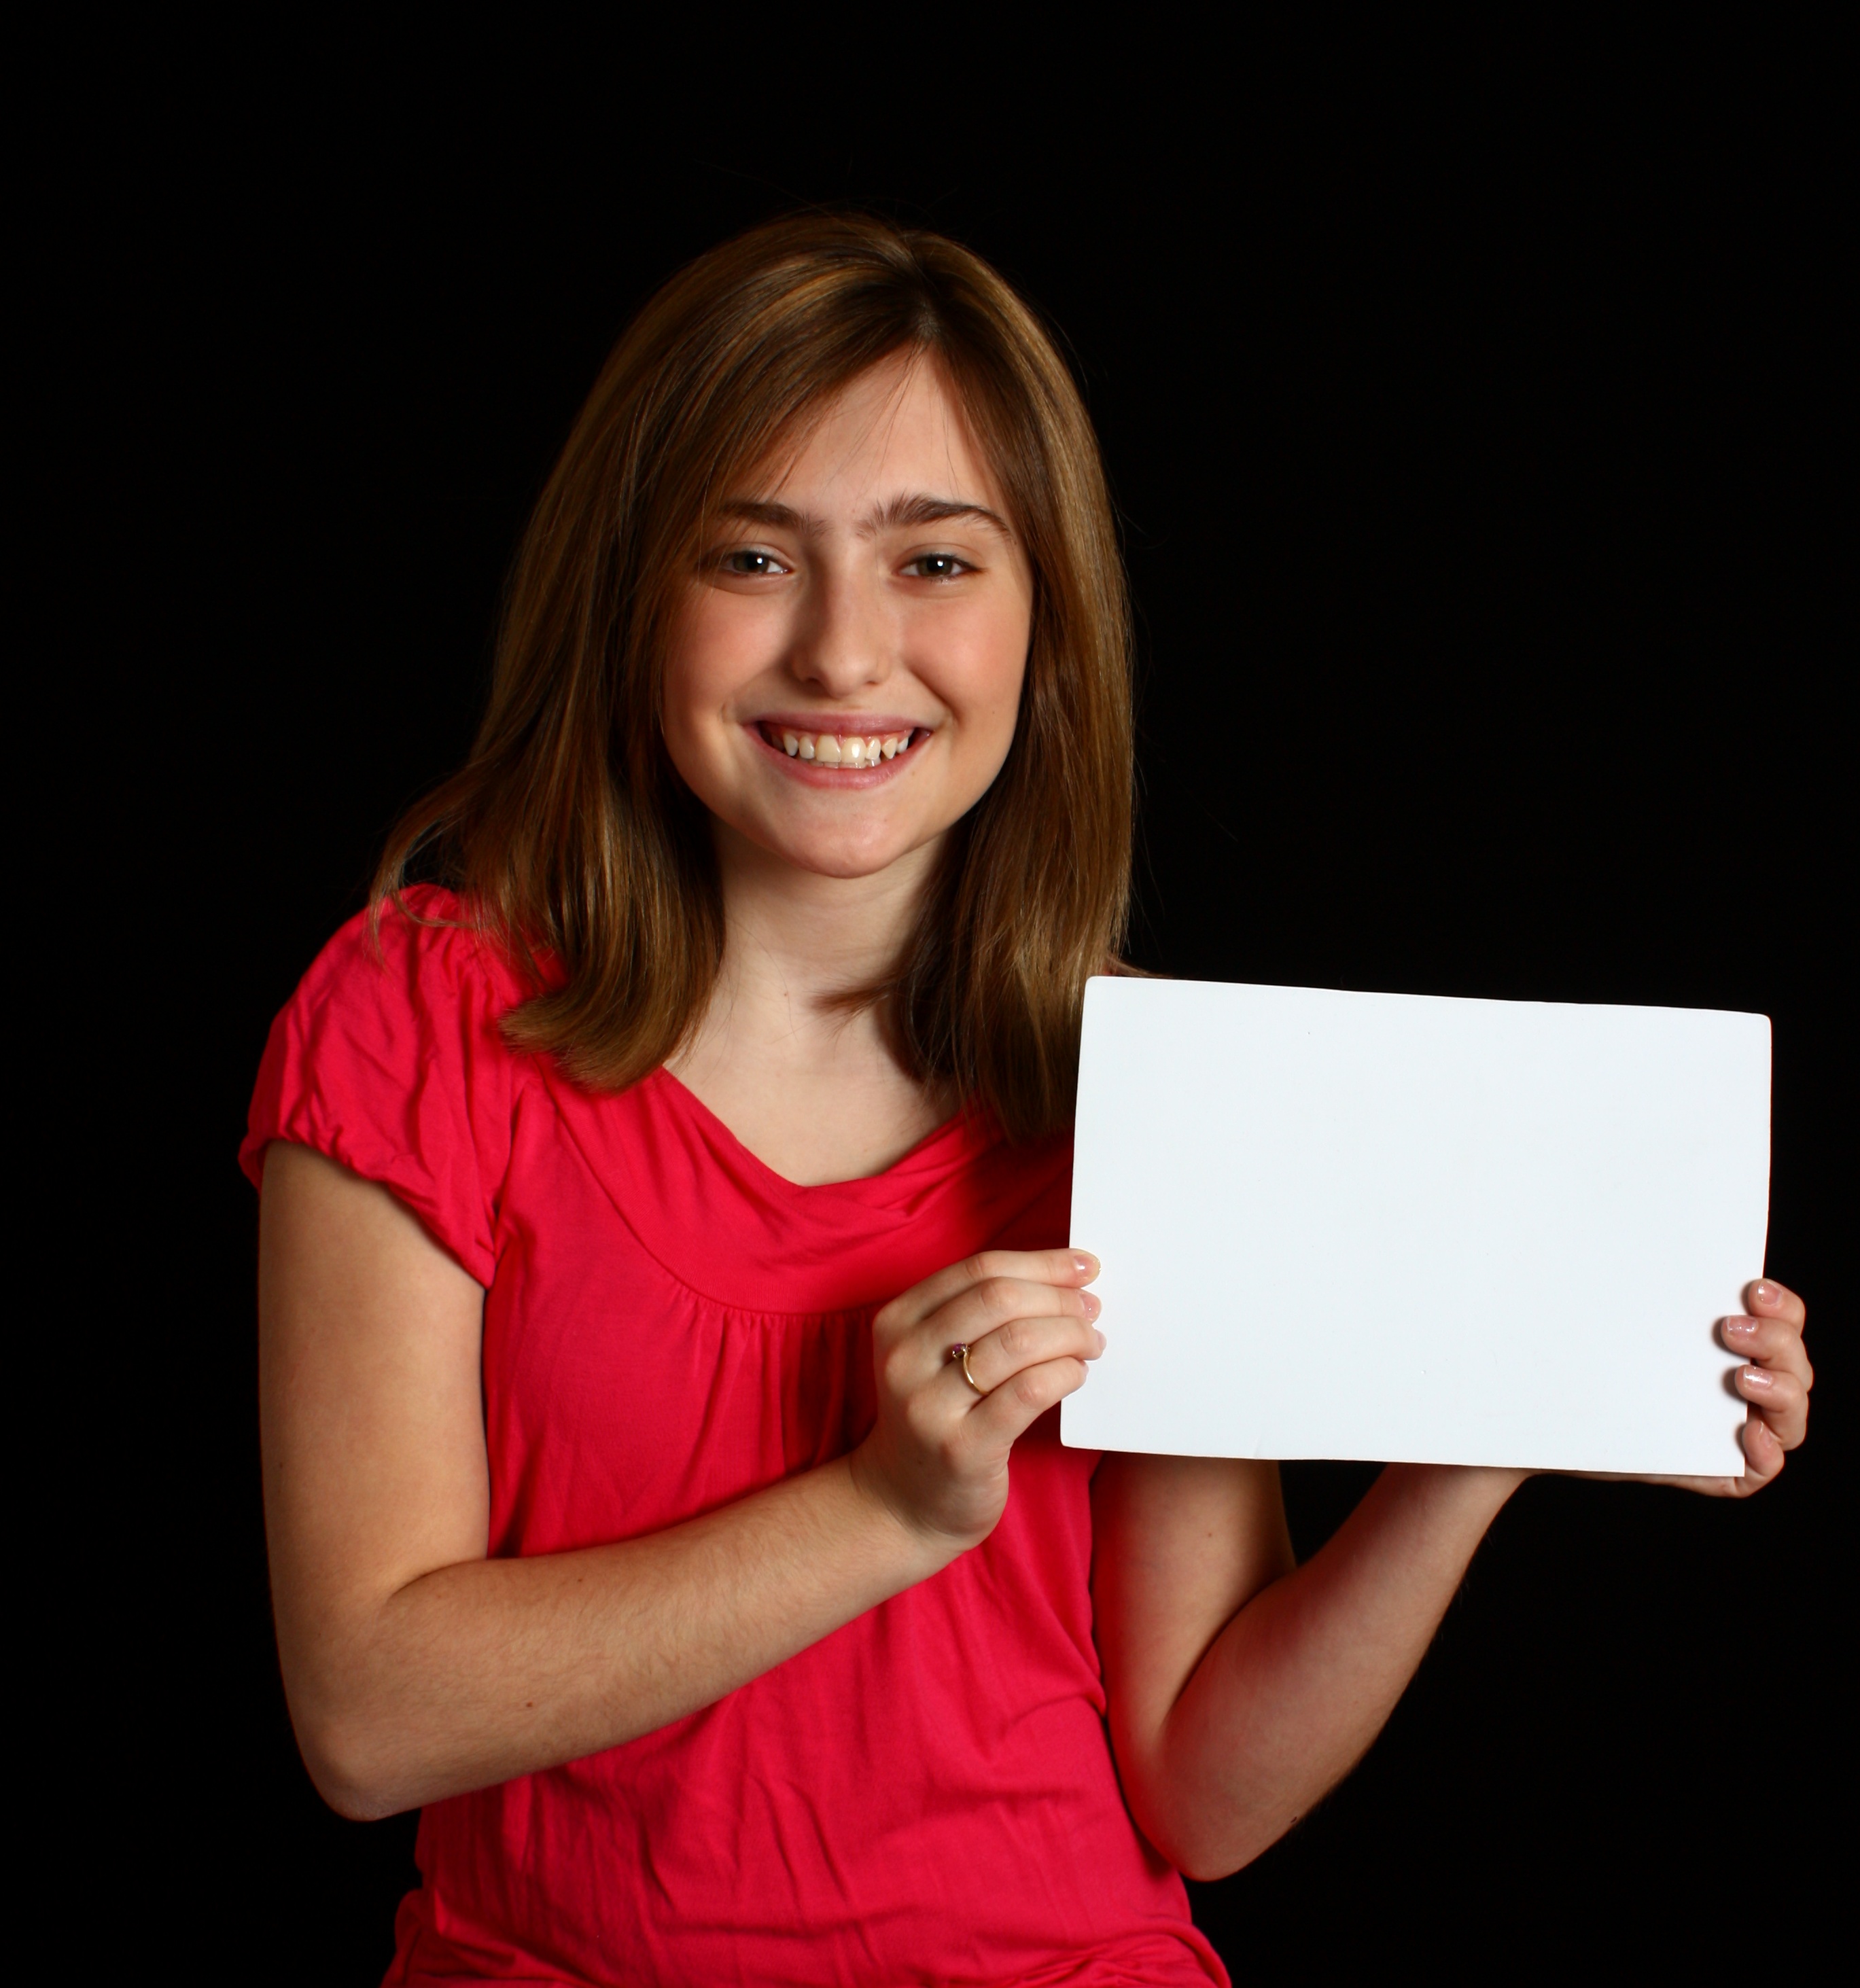 A cute young girl holding a blank sign photo